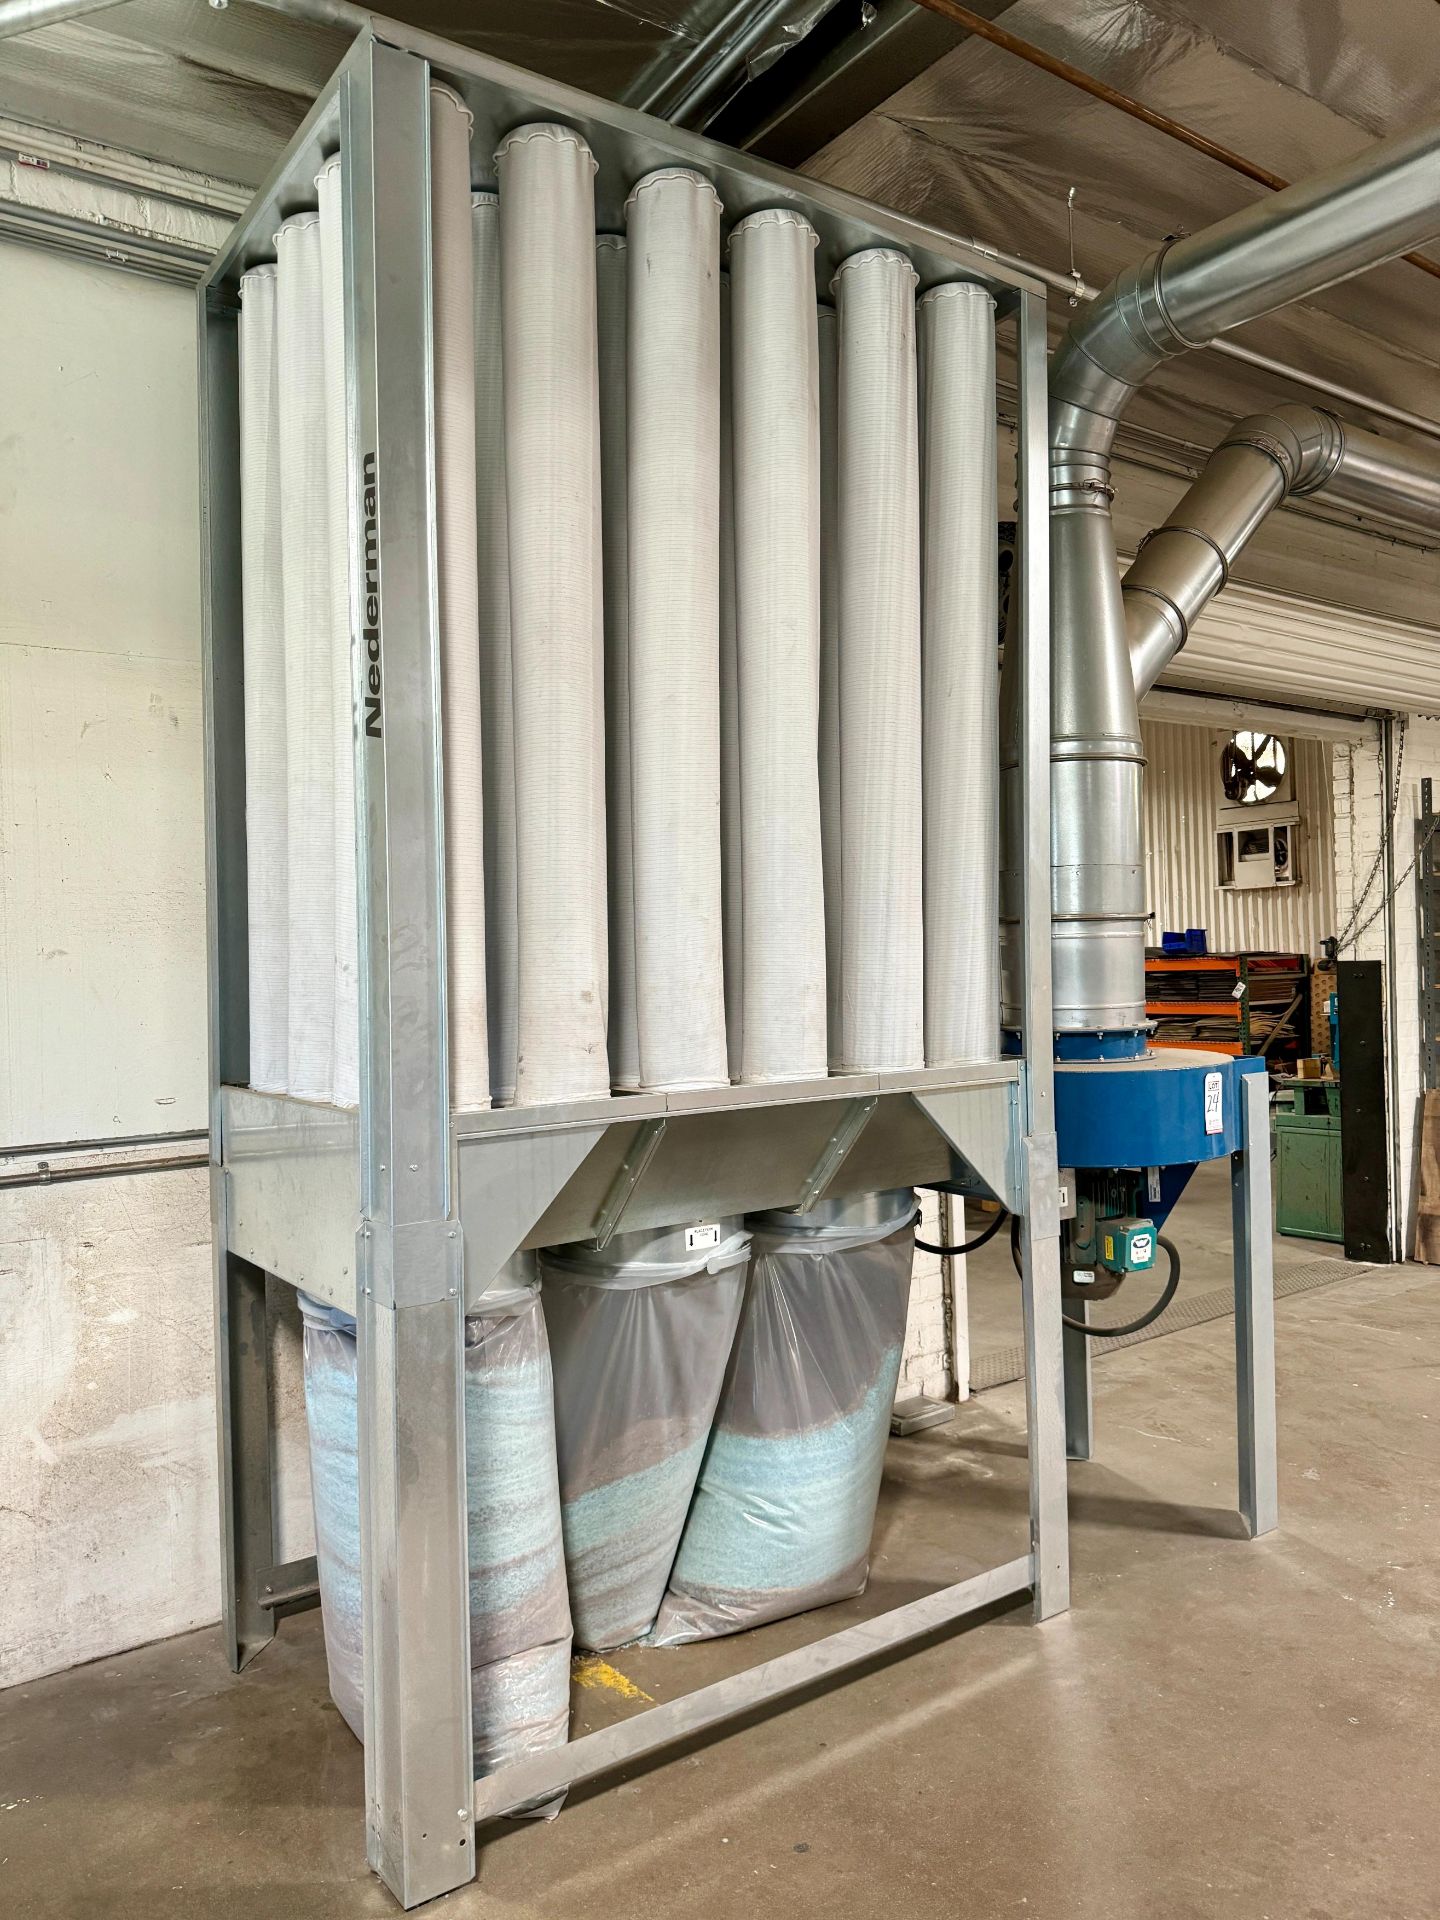 2018 NEDERMAN NFP-S1000 BAG FILTER DUST COLLECTOR, CTR. NO. 18345-00, ITEM NO. 89101009, 10 HP, 3-